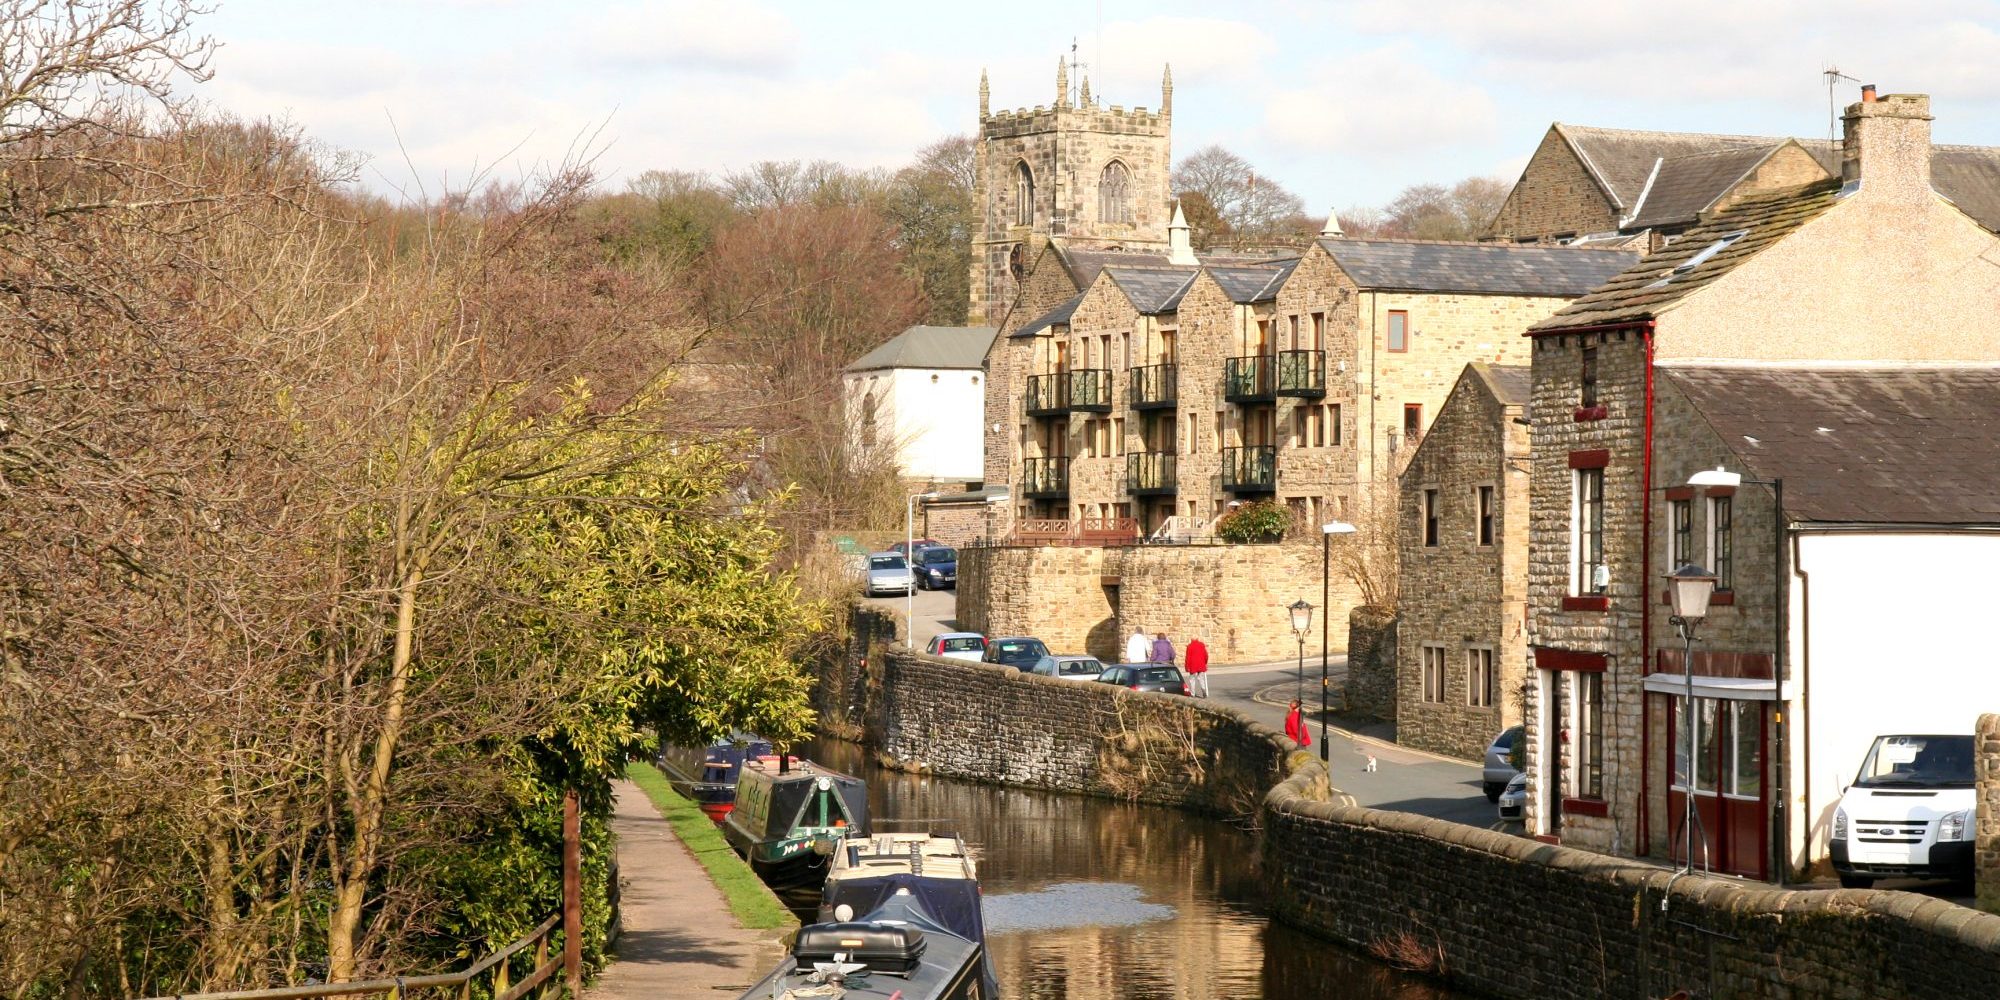 view across the canal and rooftops of Skipton